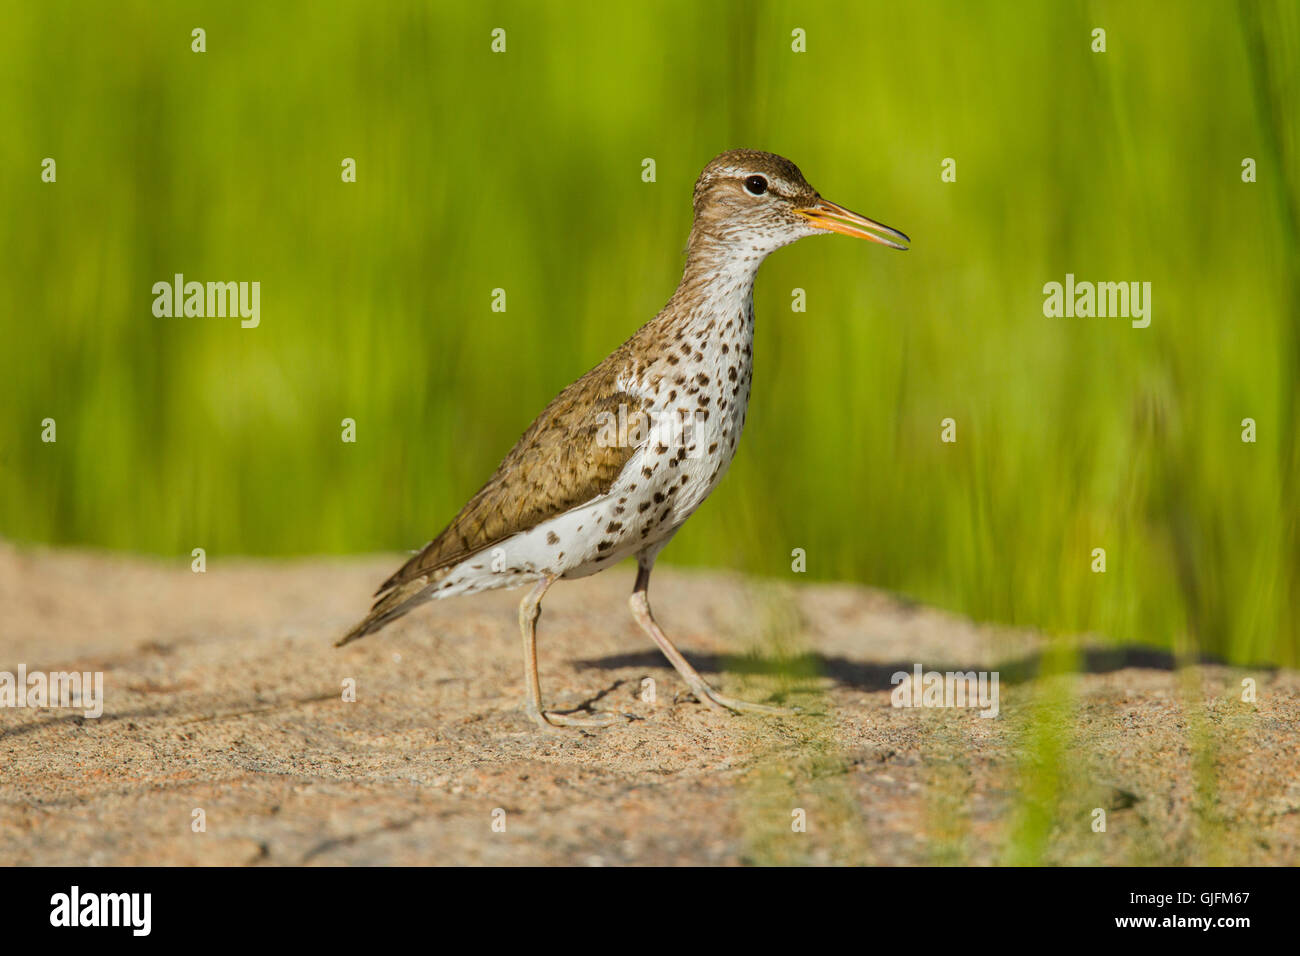 Spotted Sandpiper  Actitis macularius east of Beaver, Utah, United States 4 July     Adult in breeding plumage.        Scolopaci Stock Photo